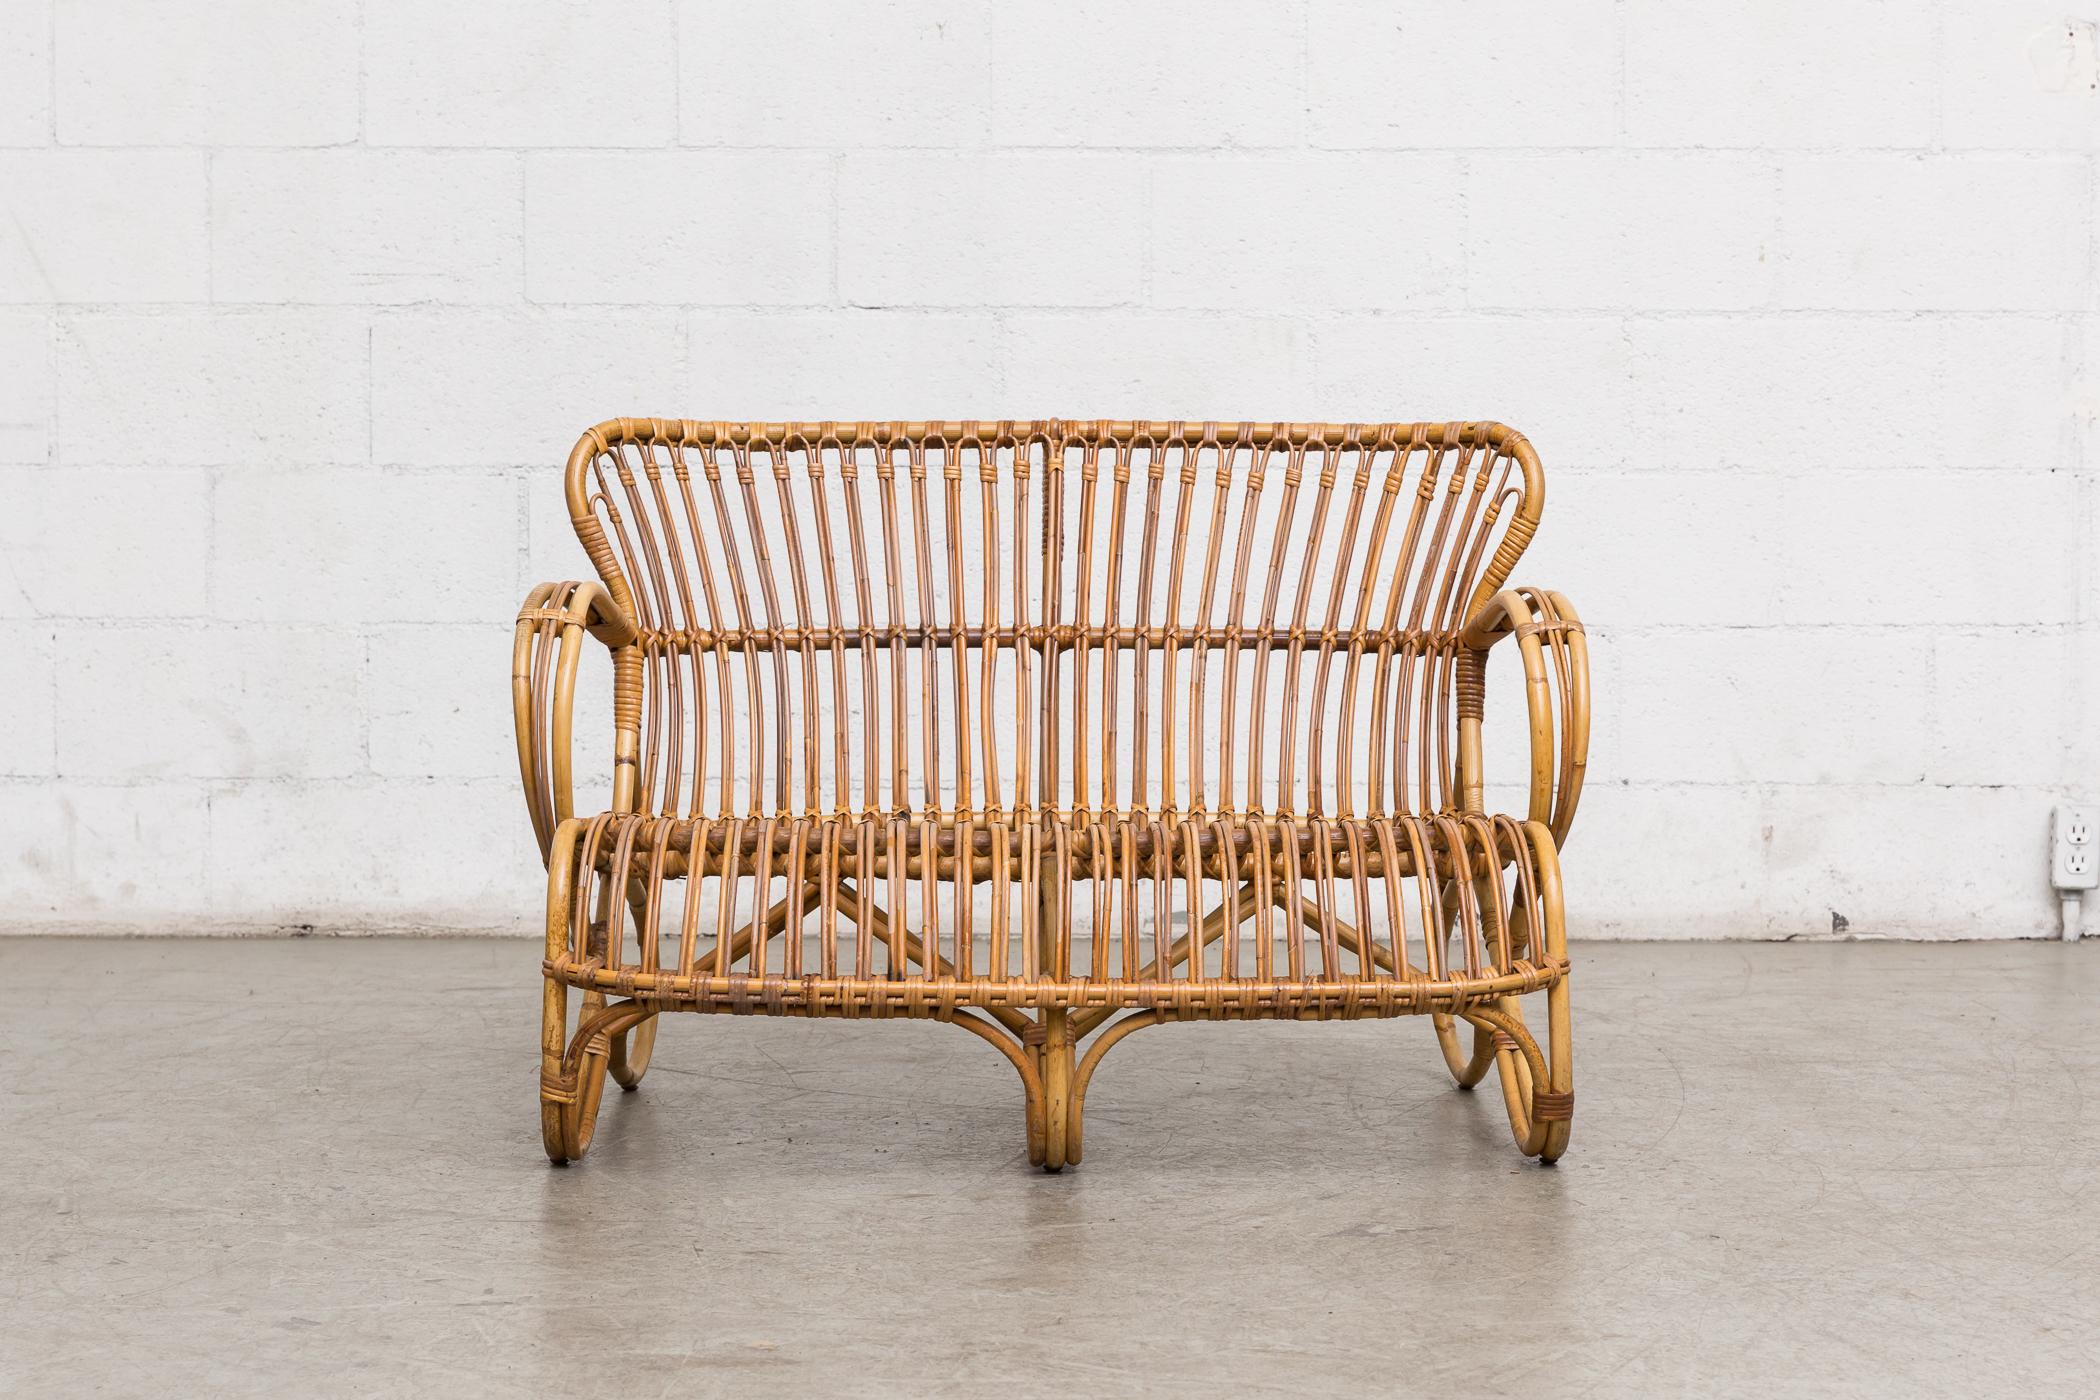 Sweet little bamboo love seat in good original condition with wear consistent with its age and usage.